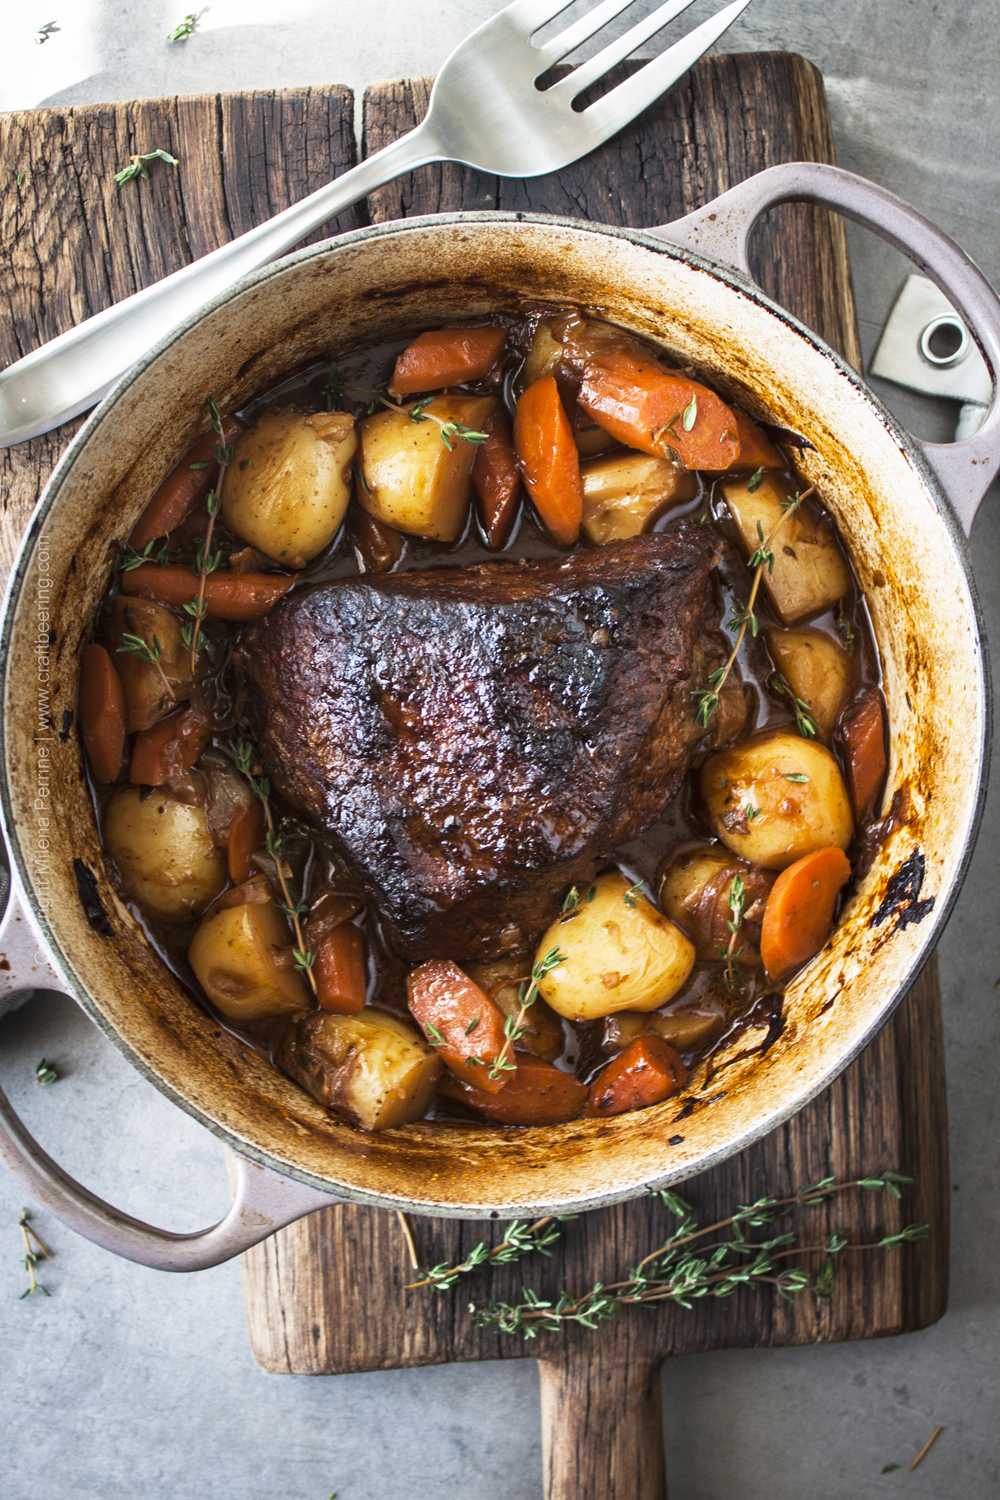 Beer rump roast braised low and slow in a Dutch oven.